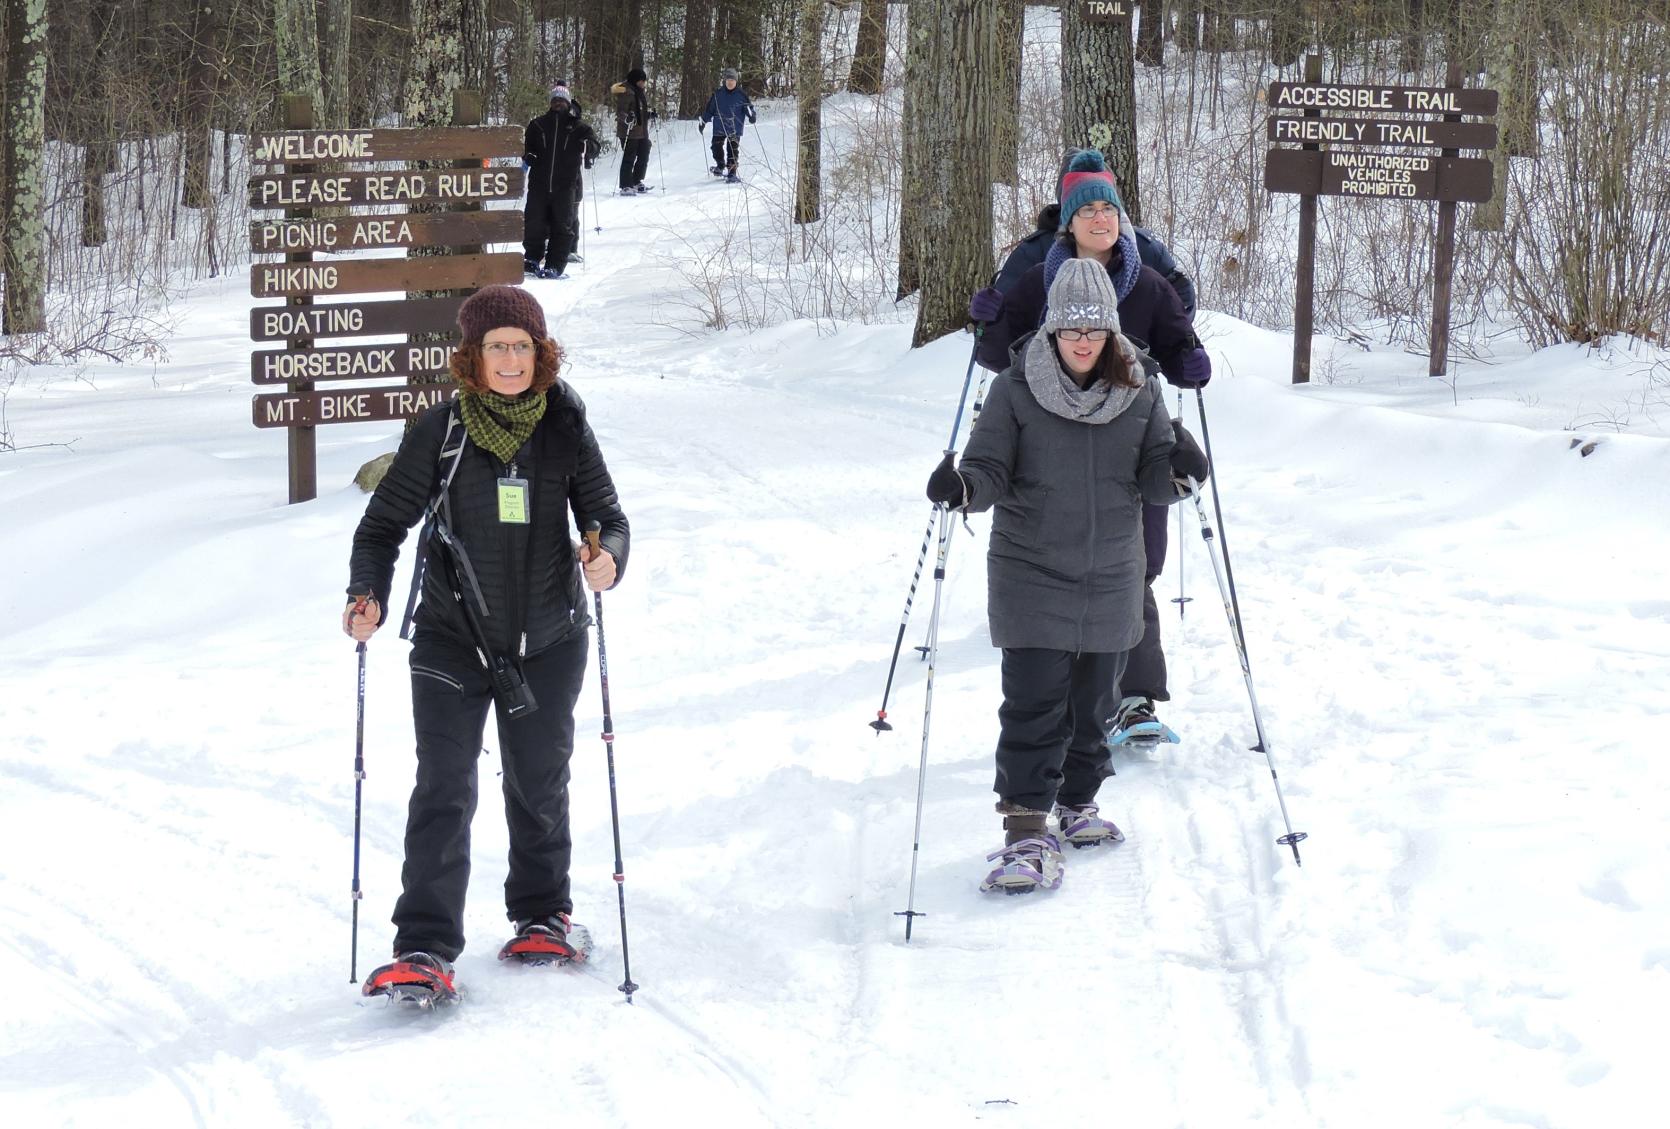 Snowshoers using ski poles on a snowy winter trail in the woods.